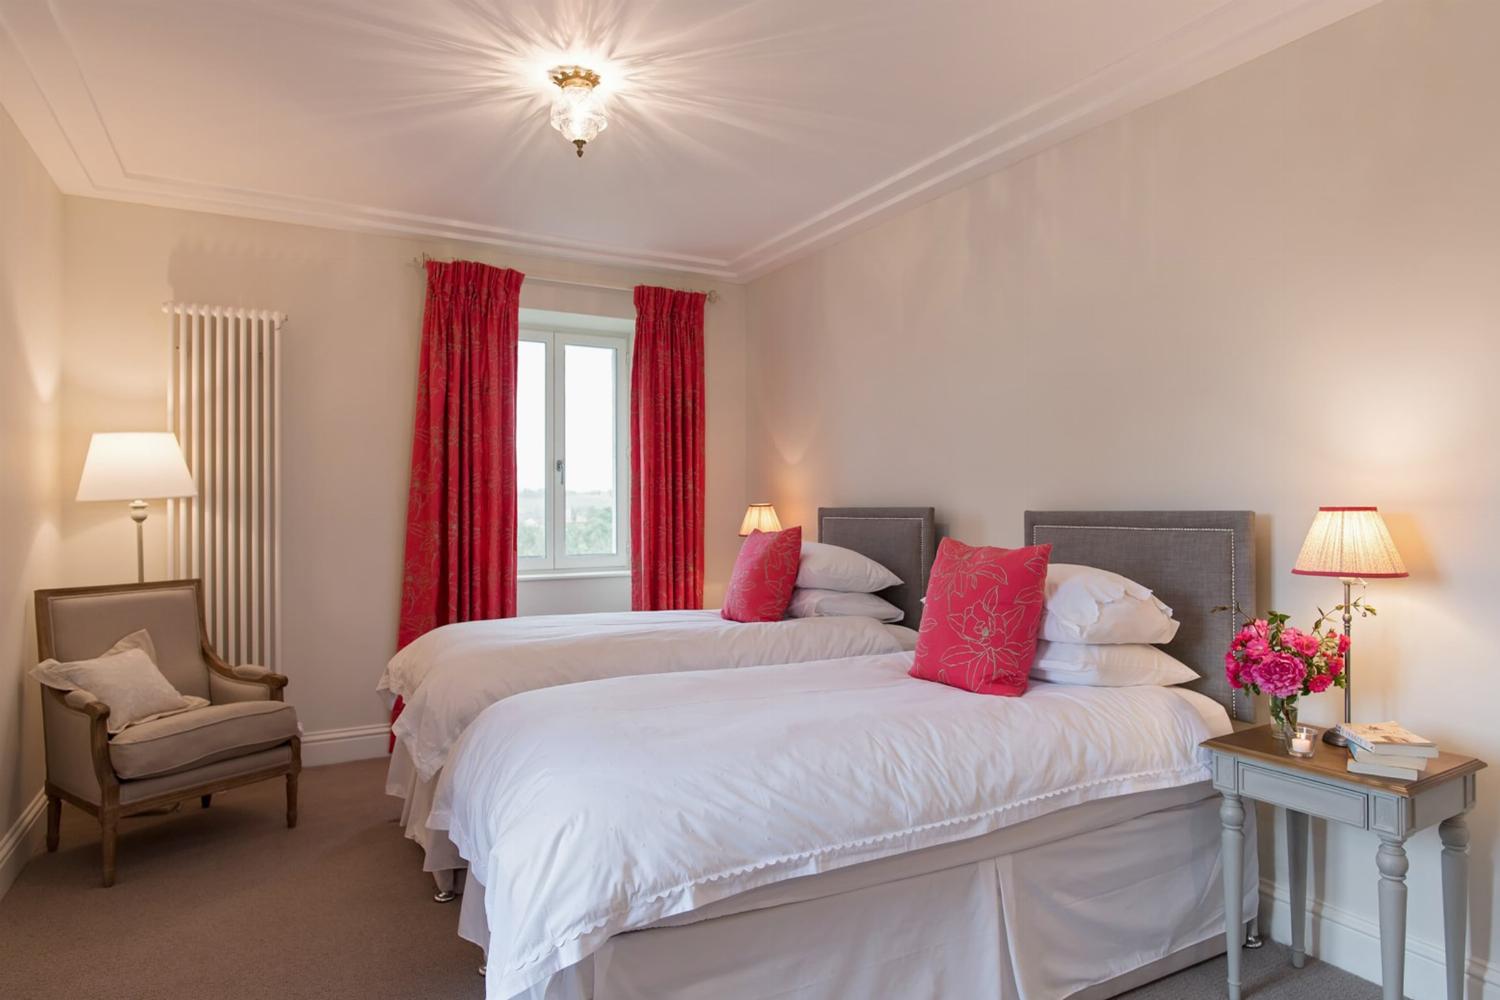 Bedroom | Holiday home in the Tarn